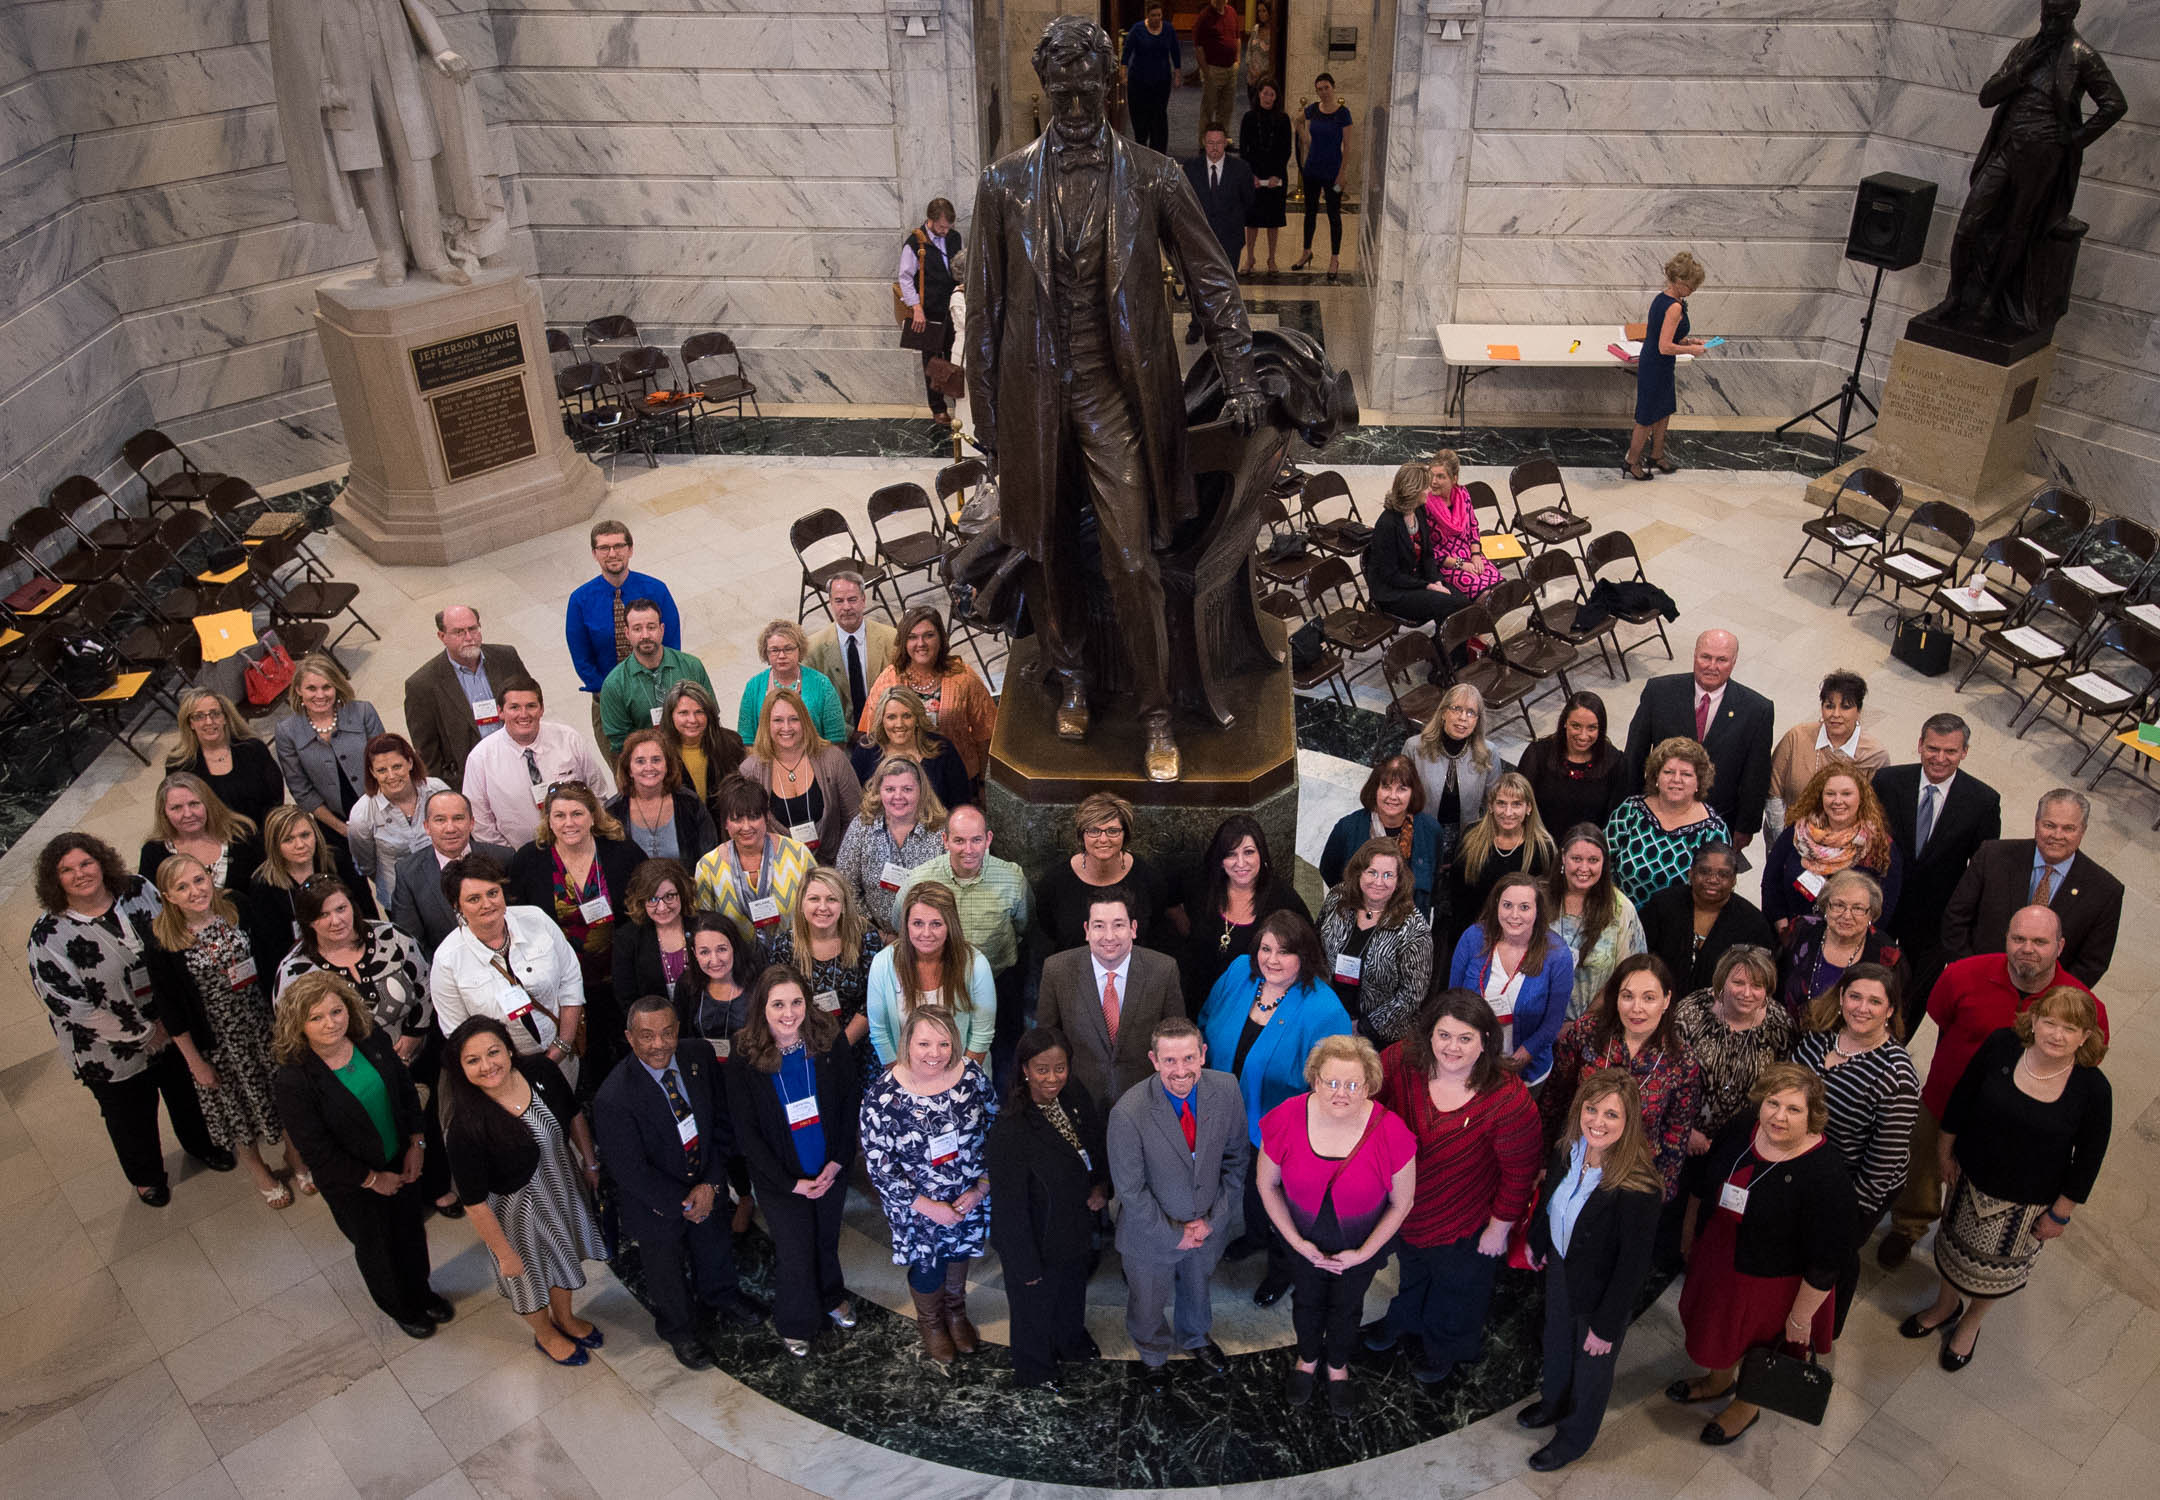 Members of Kentucky’s 2015 class of National Board Certified Teachers pose for a photo in the rotunda of the Kentucky State Capitol prior to a ceremony at which they were recognized. Photo by Bobby Ellis, March 8, 2016